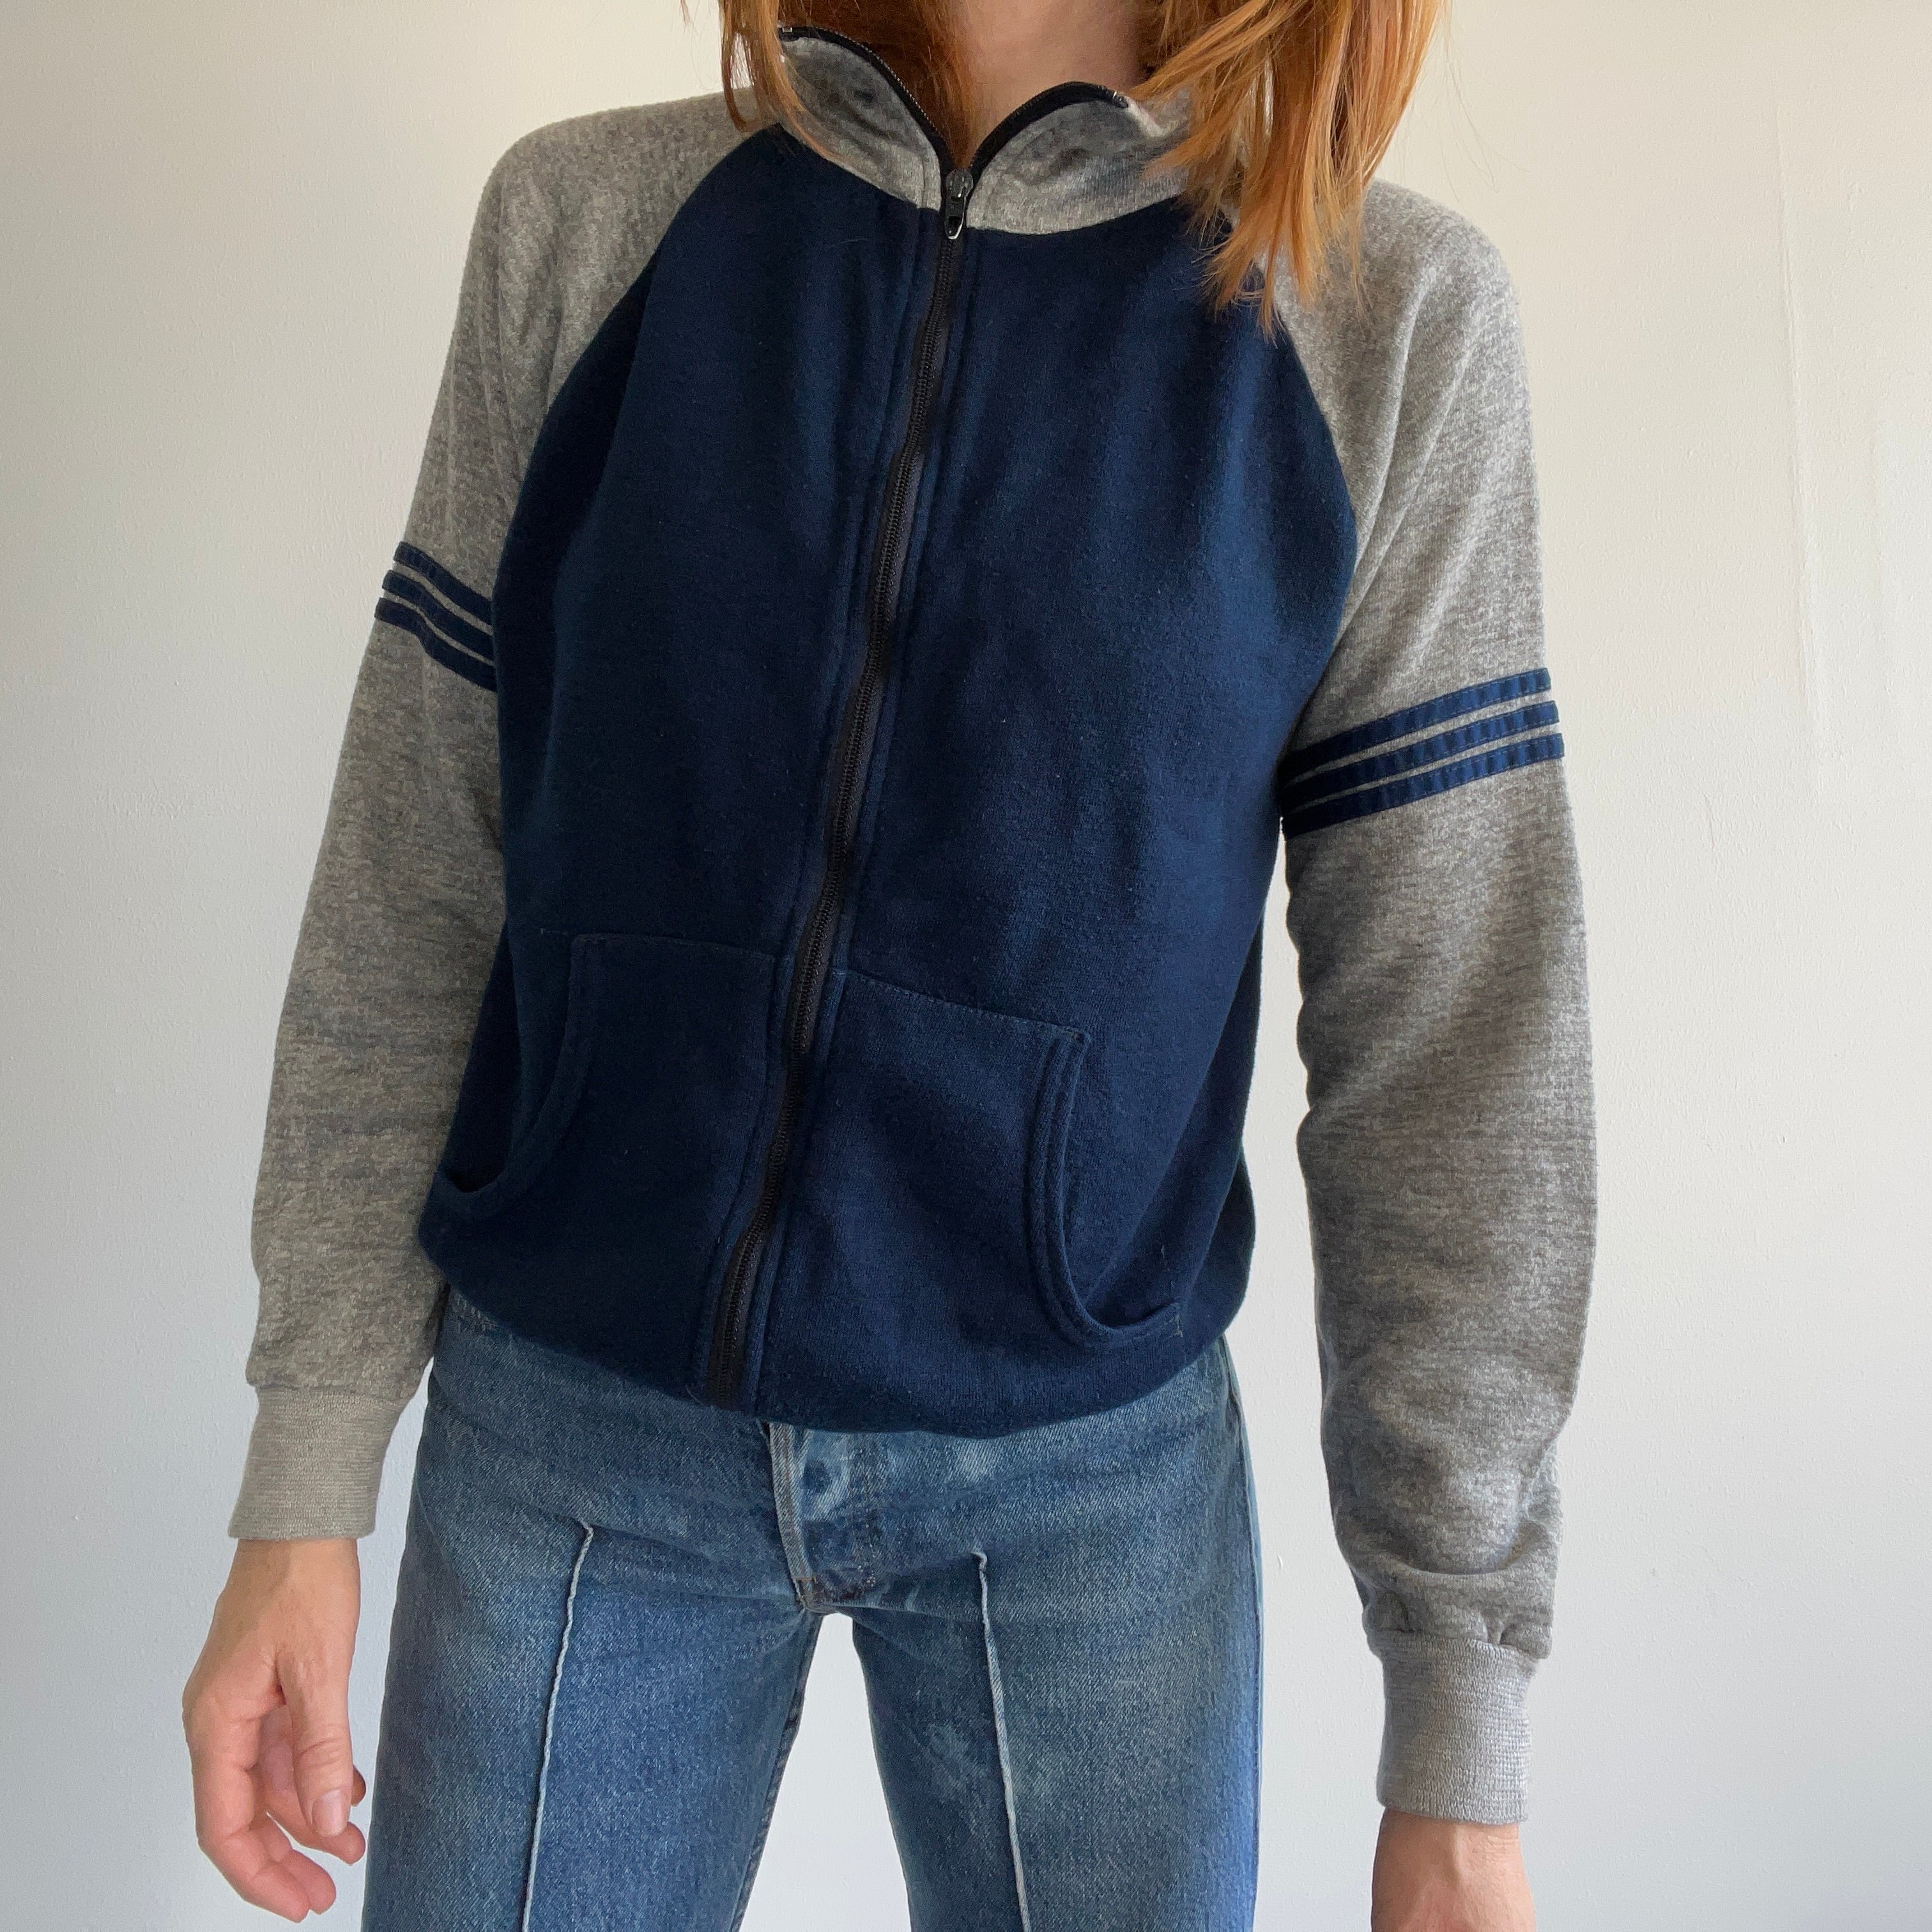 1970s Warm up Brand Super Soft and Slouchy Baseball Triple Stripe Zip Up (Say That Fast 5x)